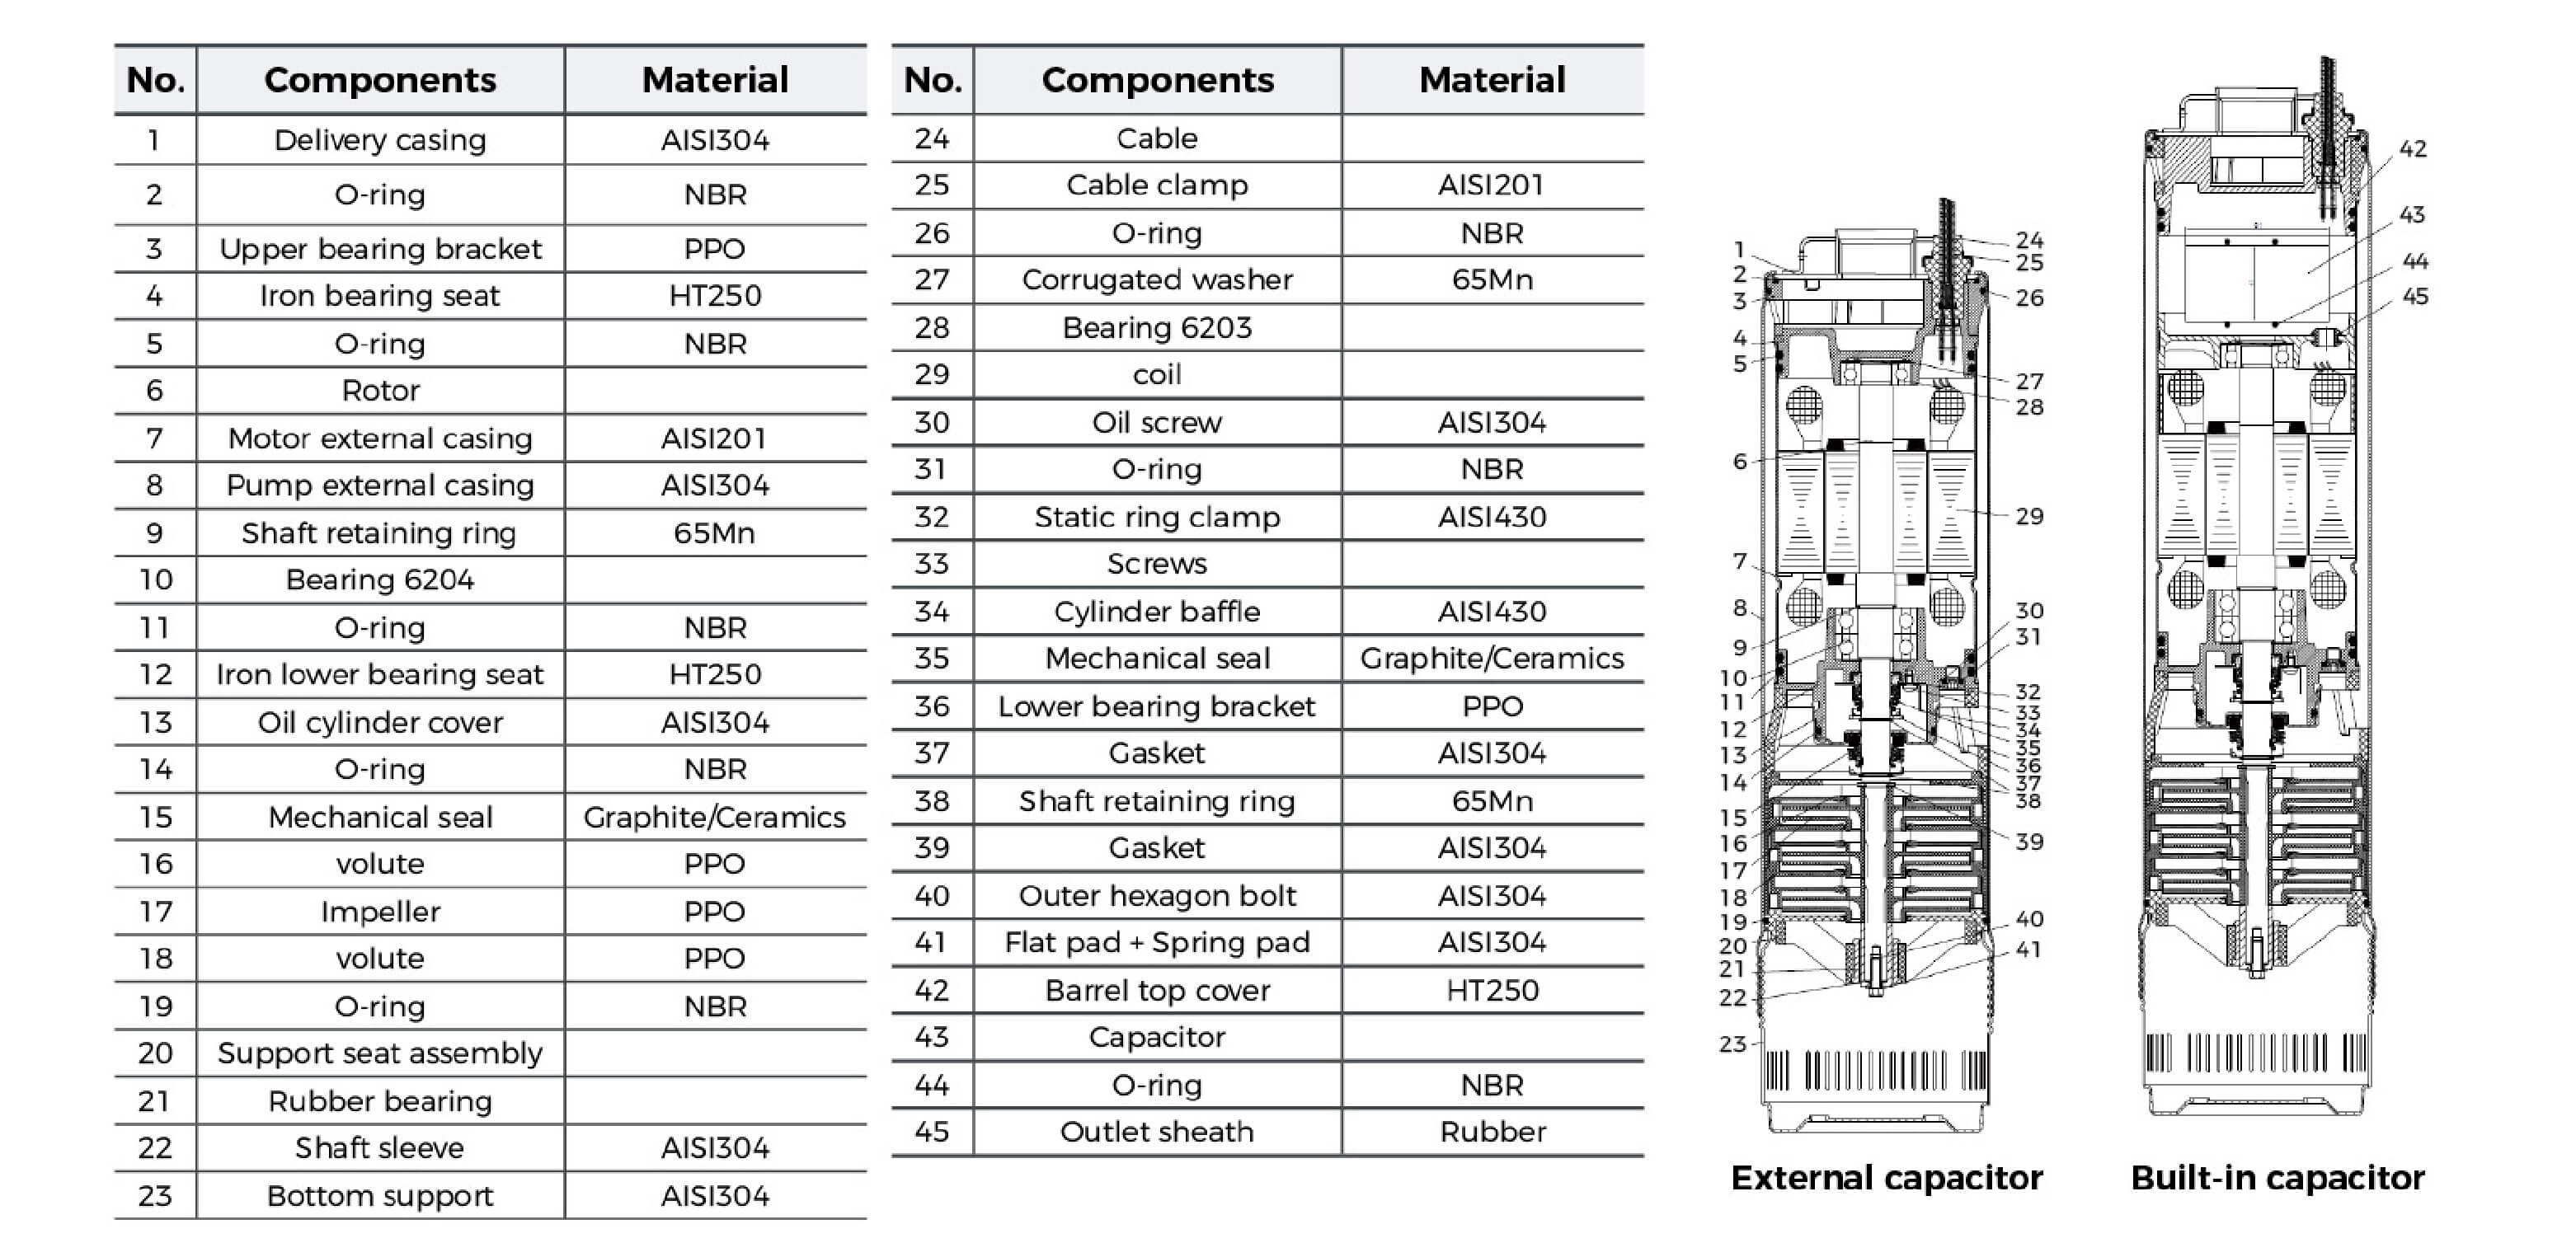 5DW Submersible Borehole Pump Material Table